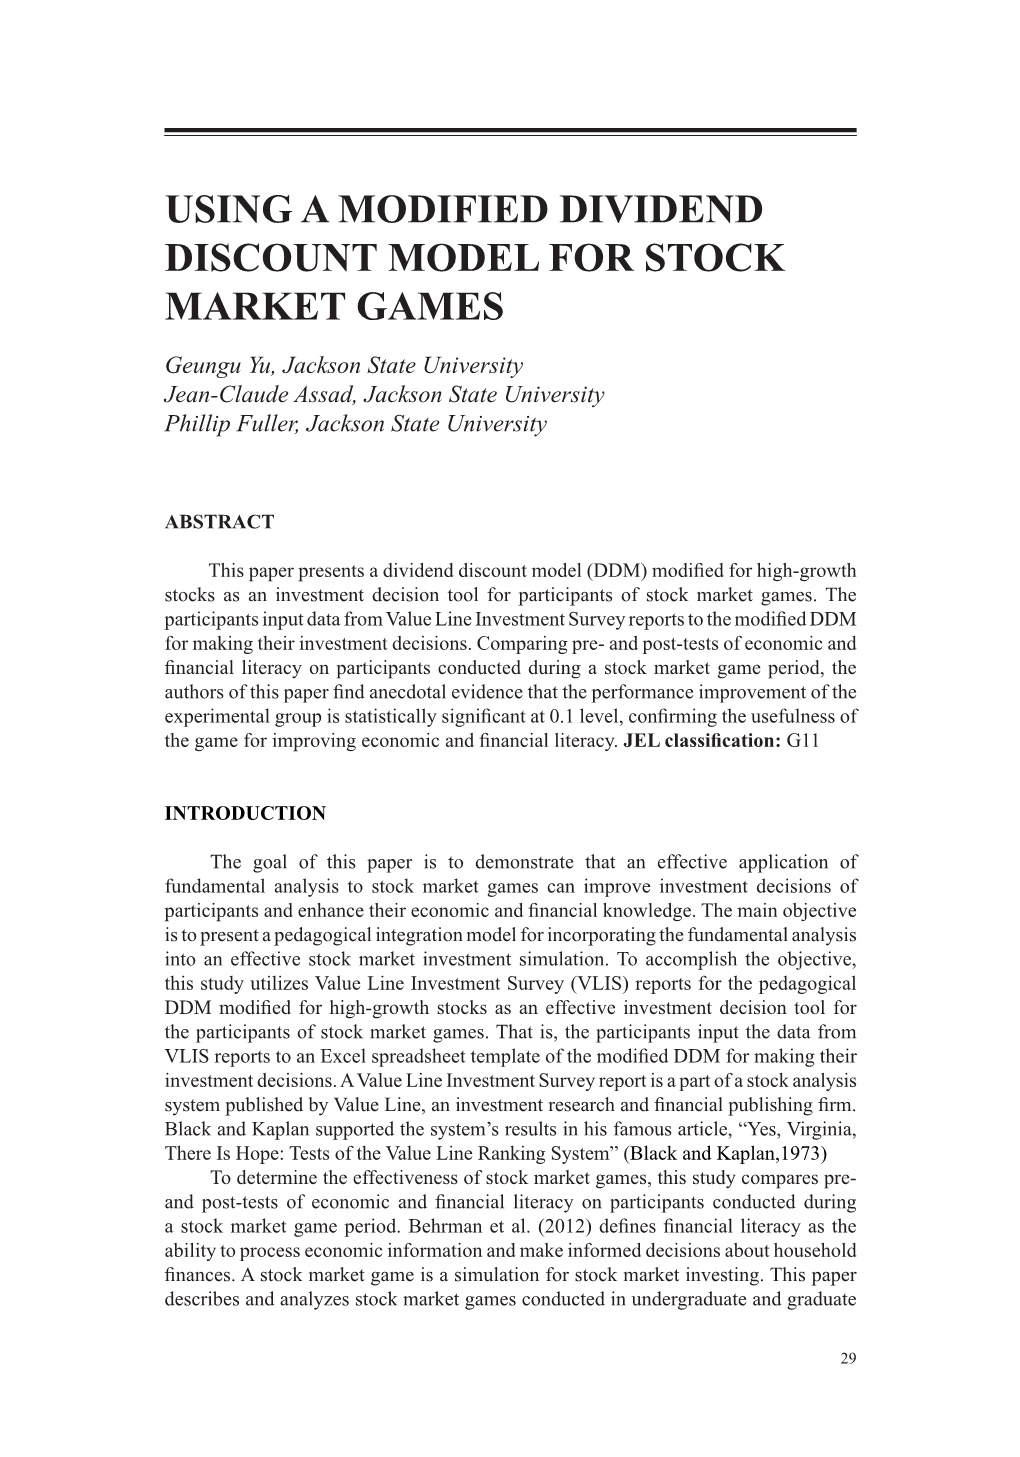 Using a Modified Dividend Discount Model for Stock Market Games